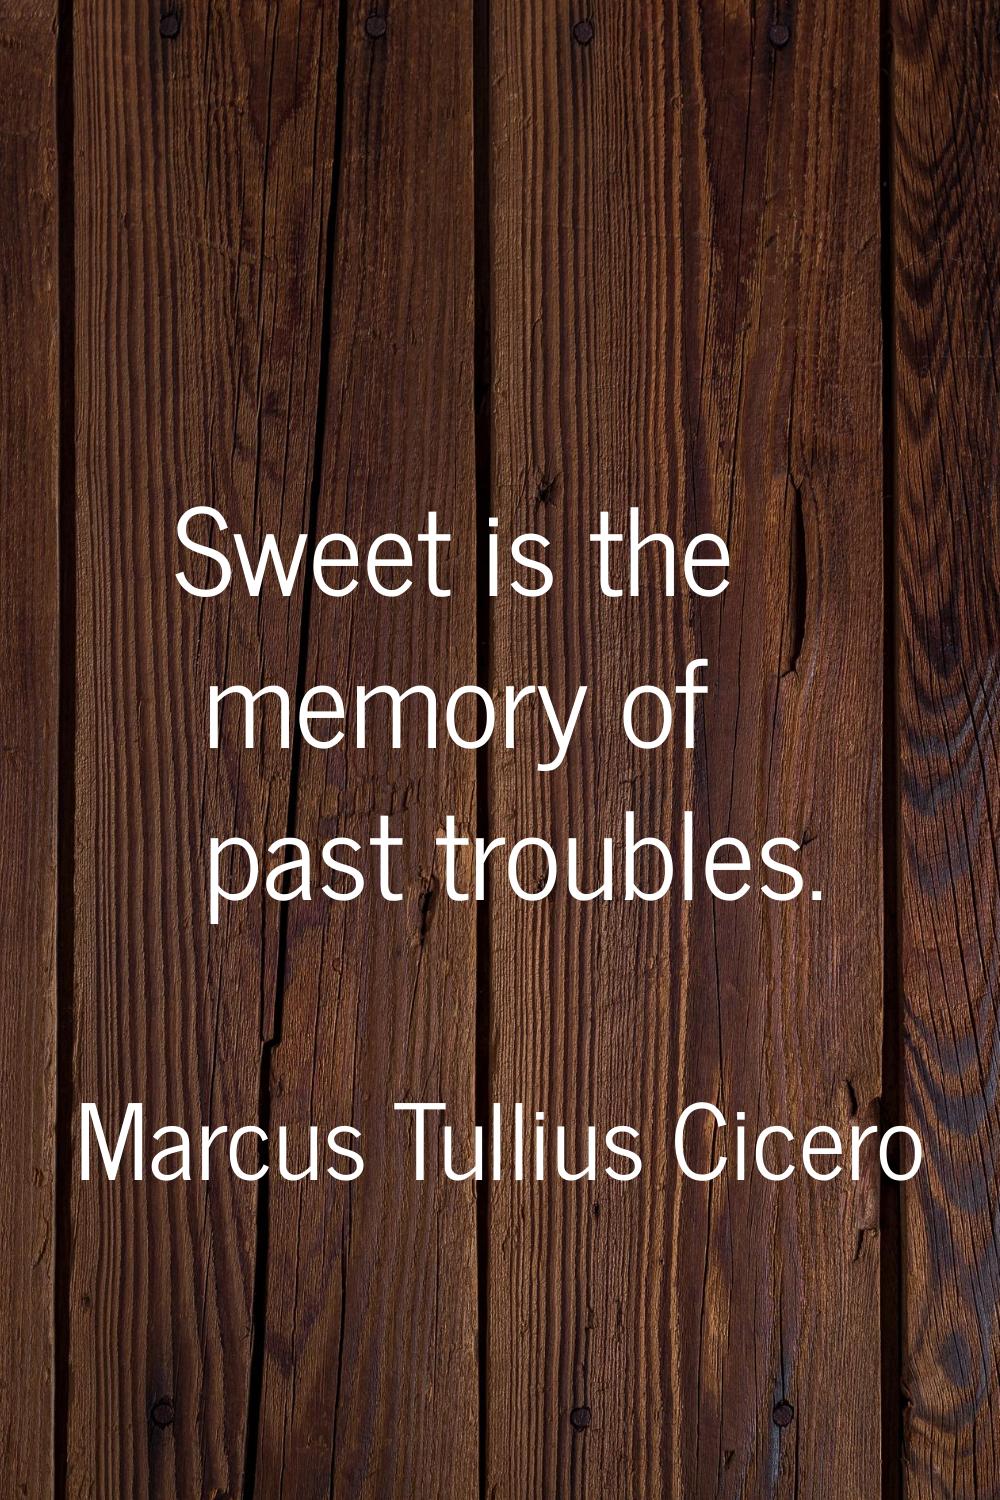 Sweet is the memory of past troubles.